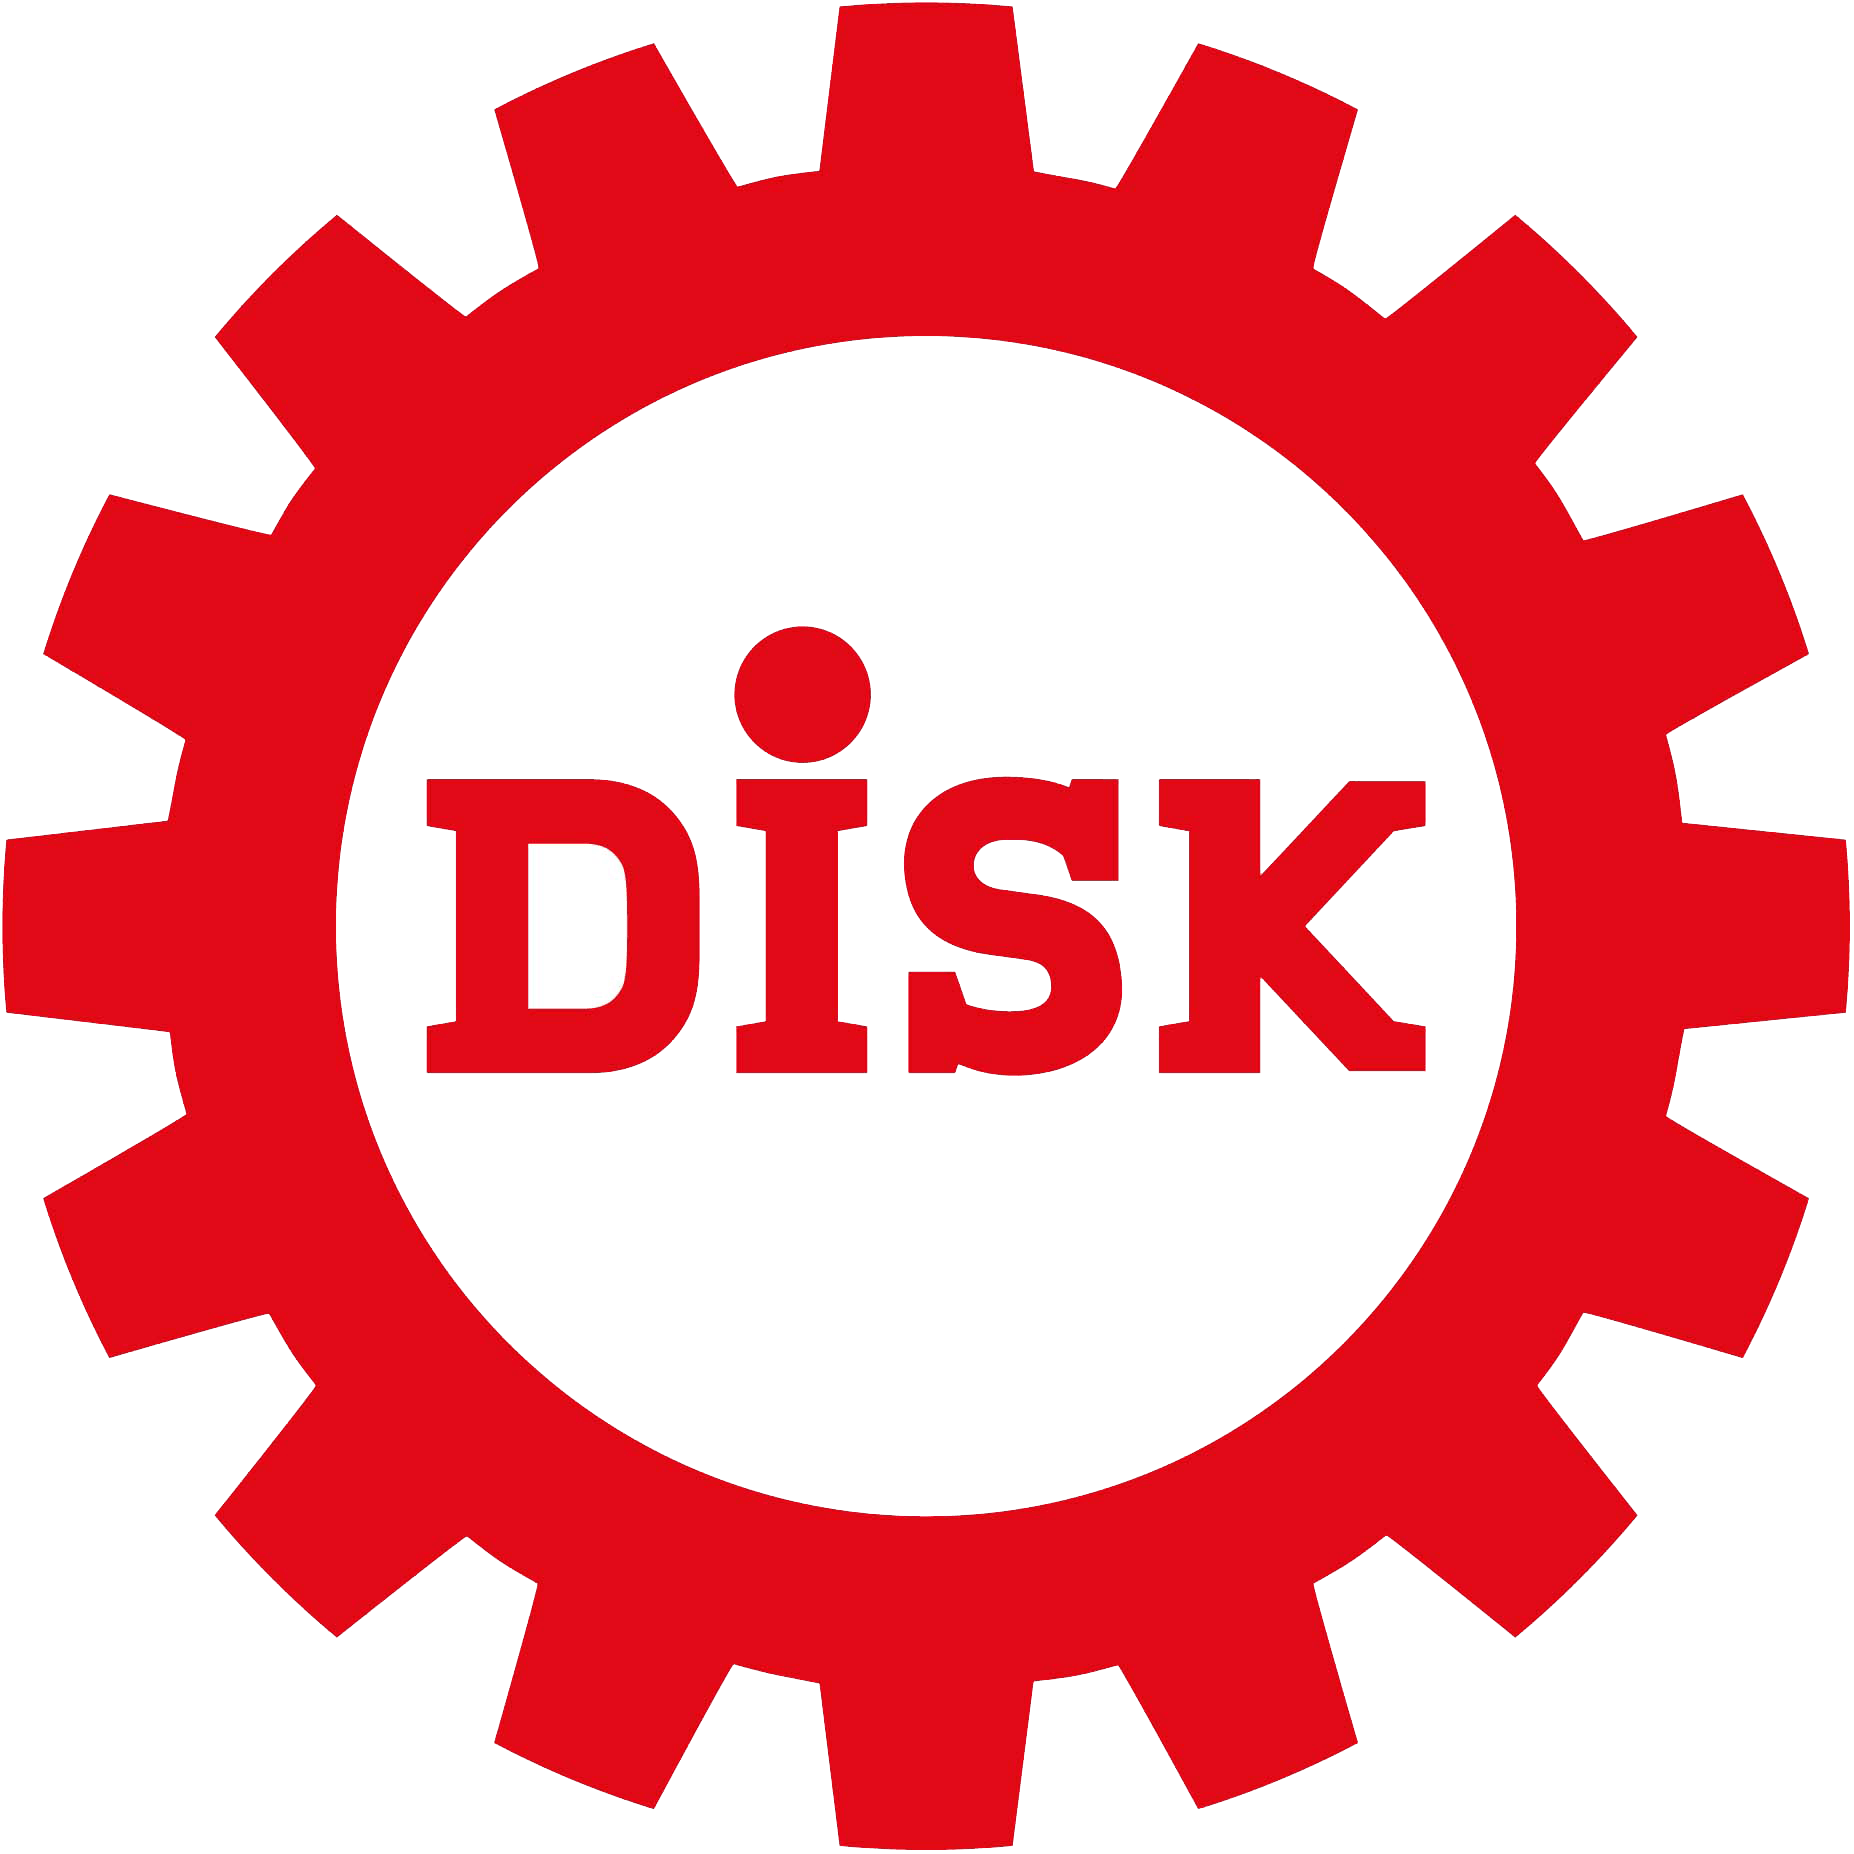 Disk Logo - File:DİSK logo.png - Wikimedia Commons